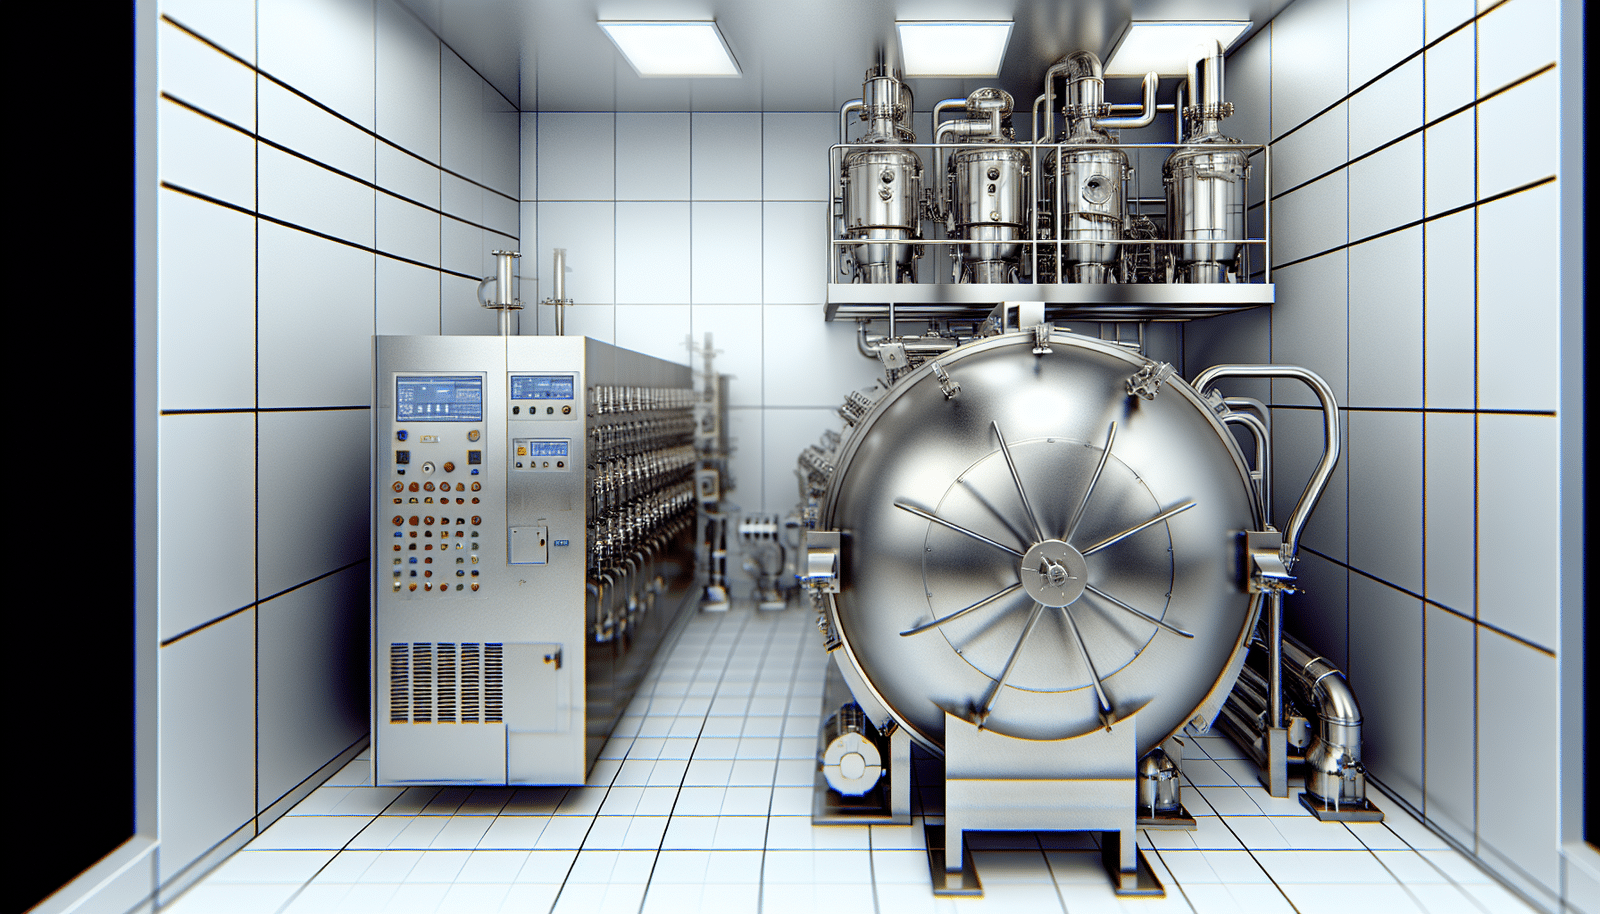 Industrial freeze drying equipment with vacuum pumps and control panel